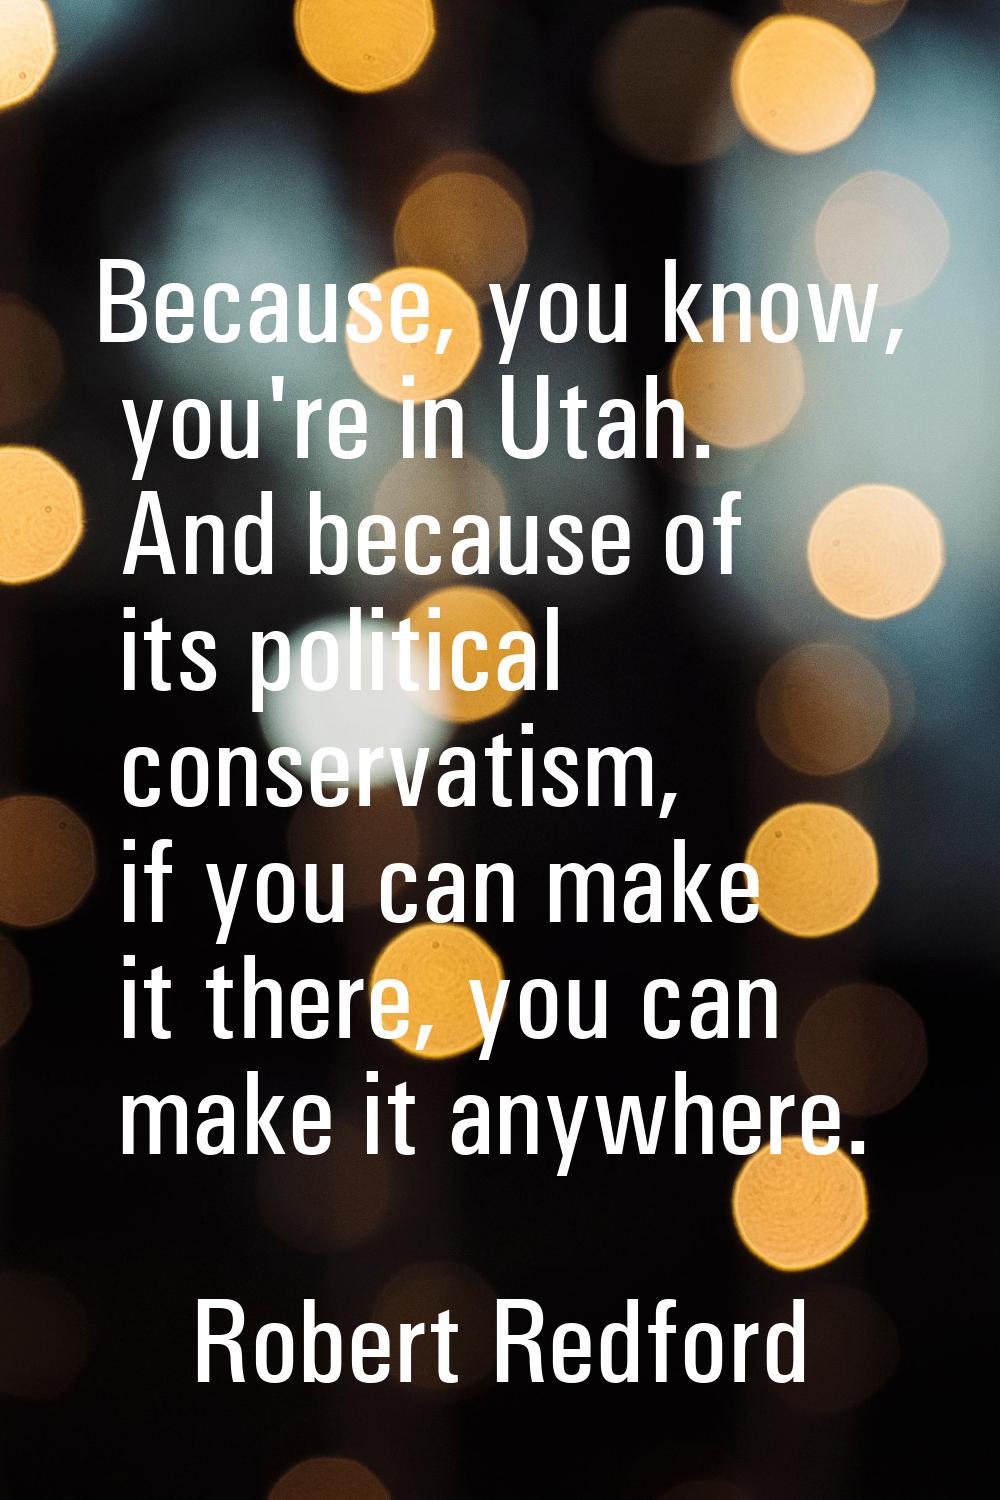 Because, you know, you're in Utah. And because of its political conservatism, if you can make it th